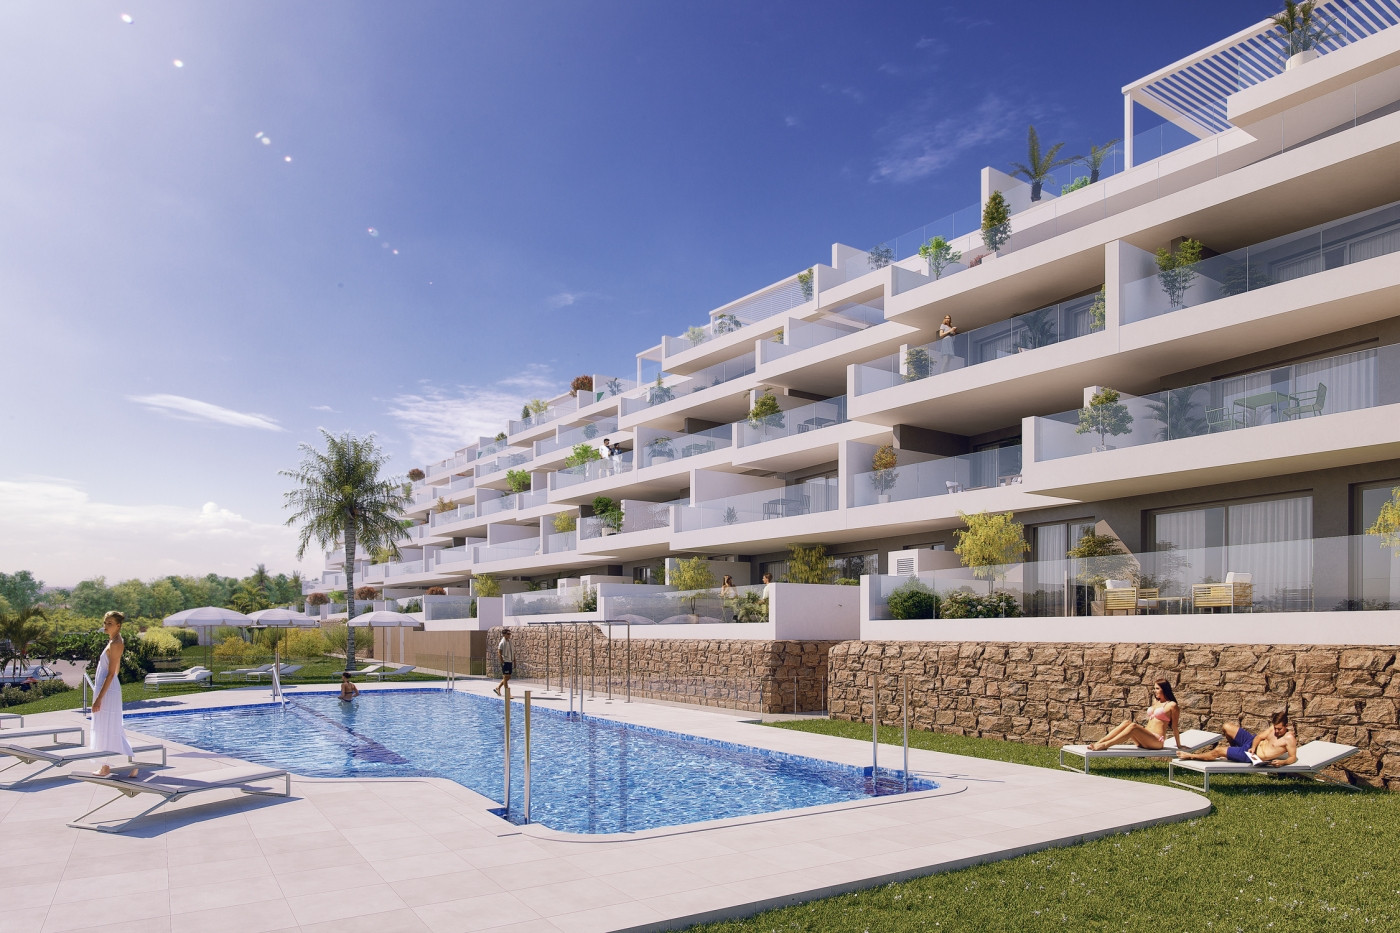 New stunning modern beach apartments for sale in Manilva